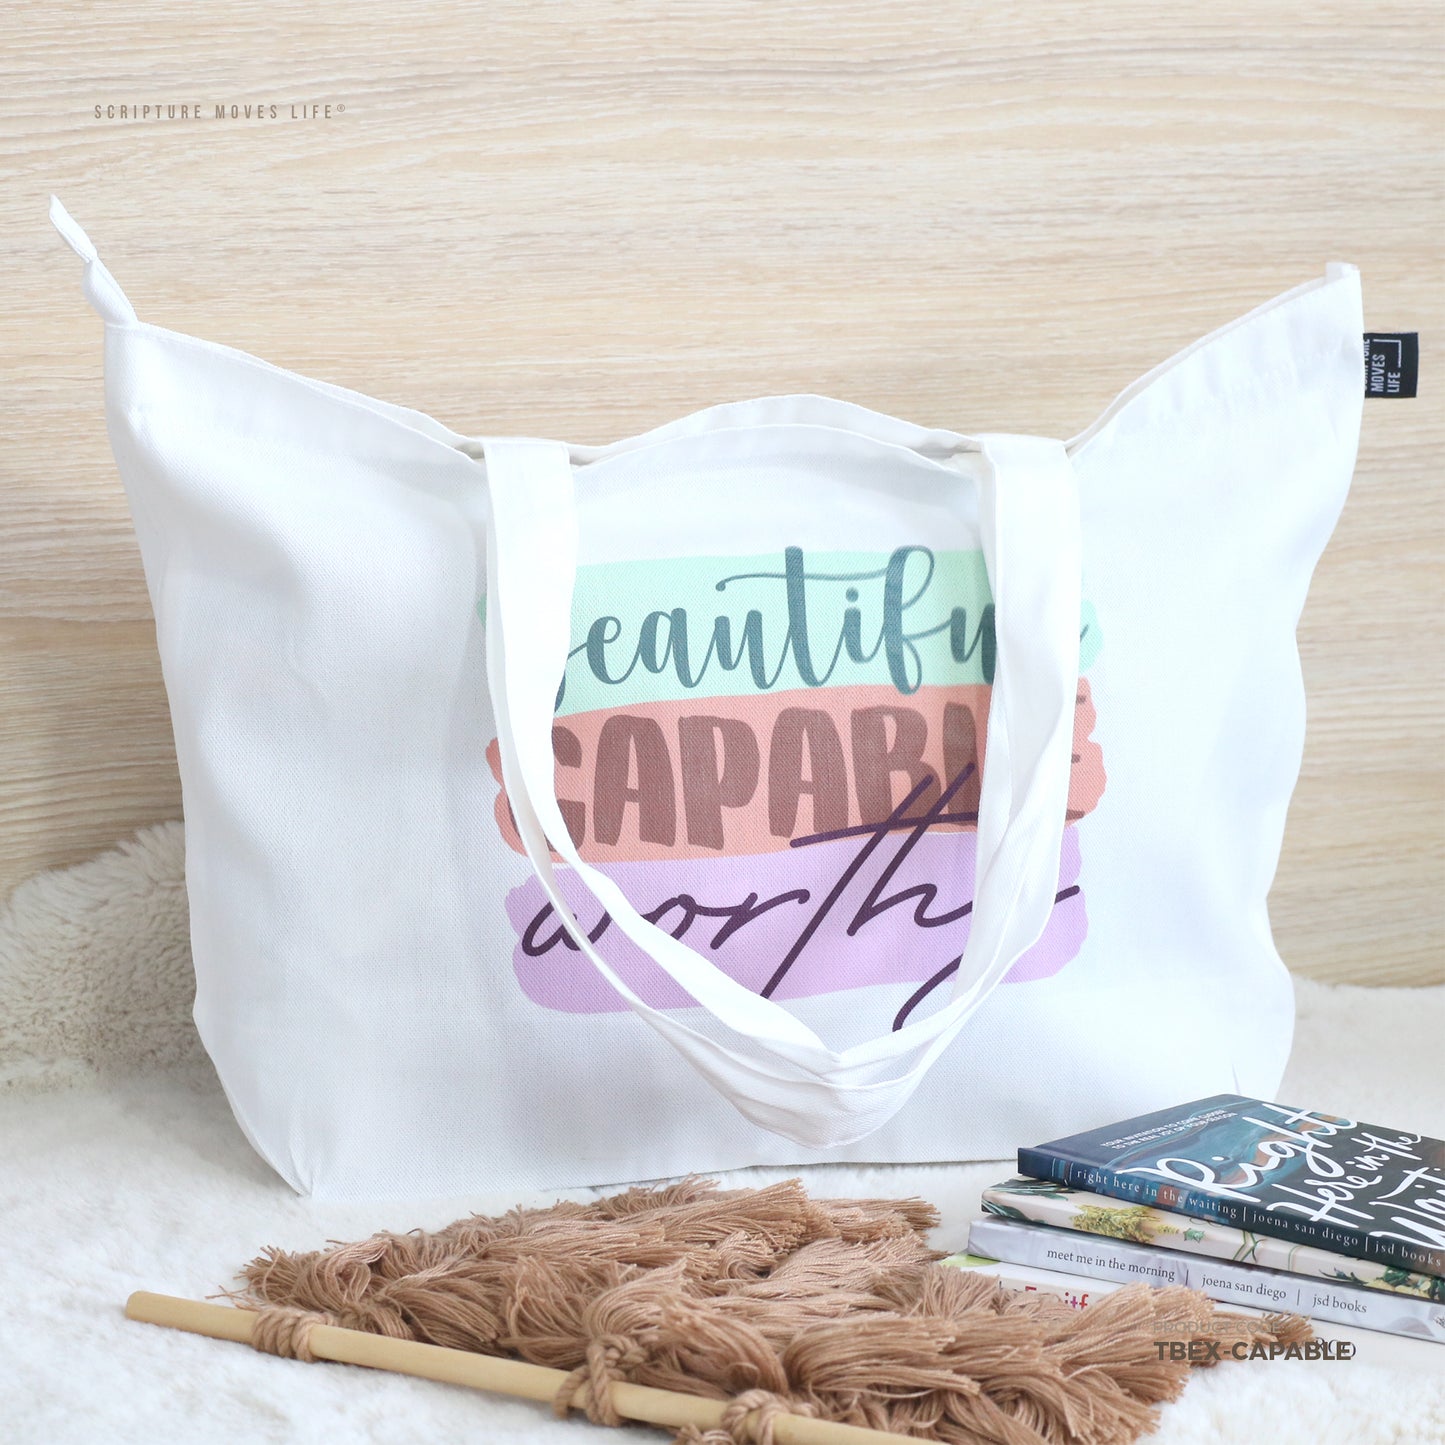 Tote Bag Expandable-Beautiful Capable Worthy